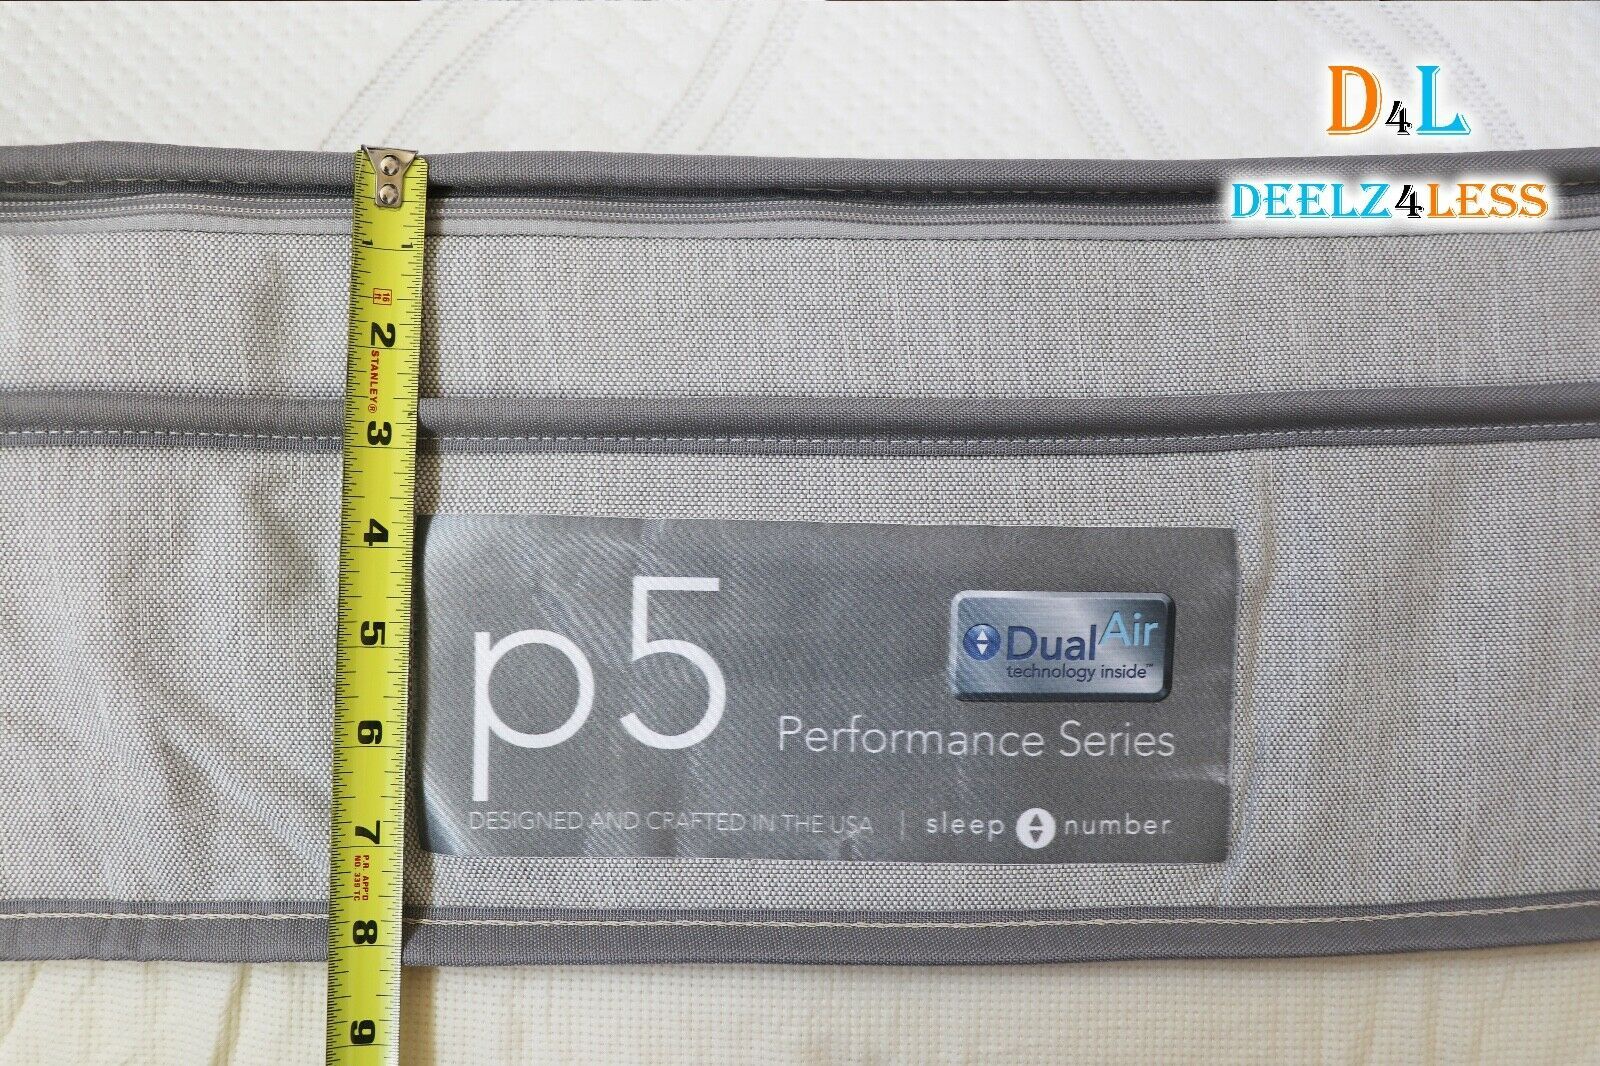 sleep number p5 mattress cover replacement